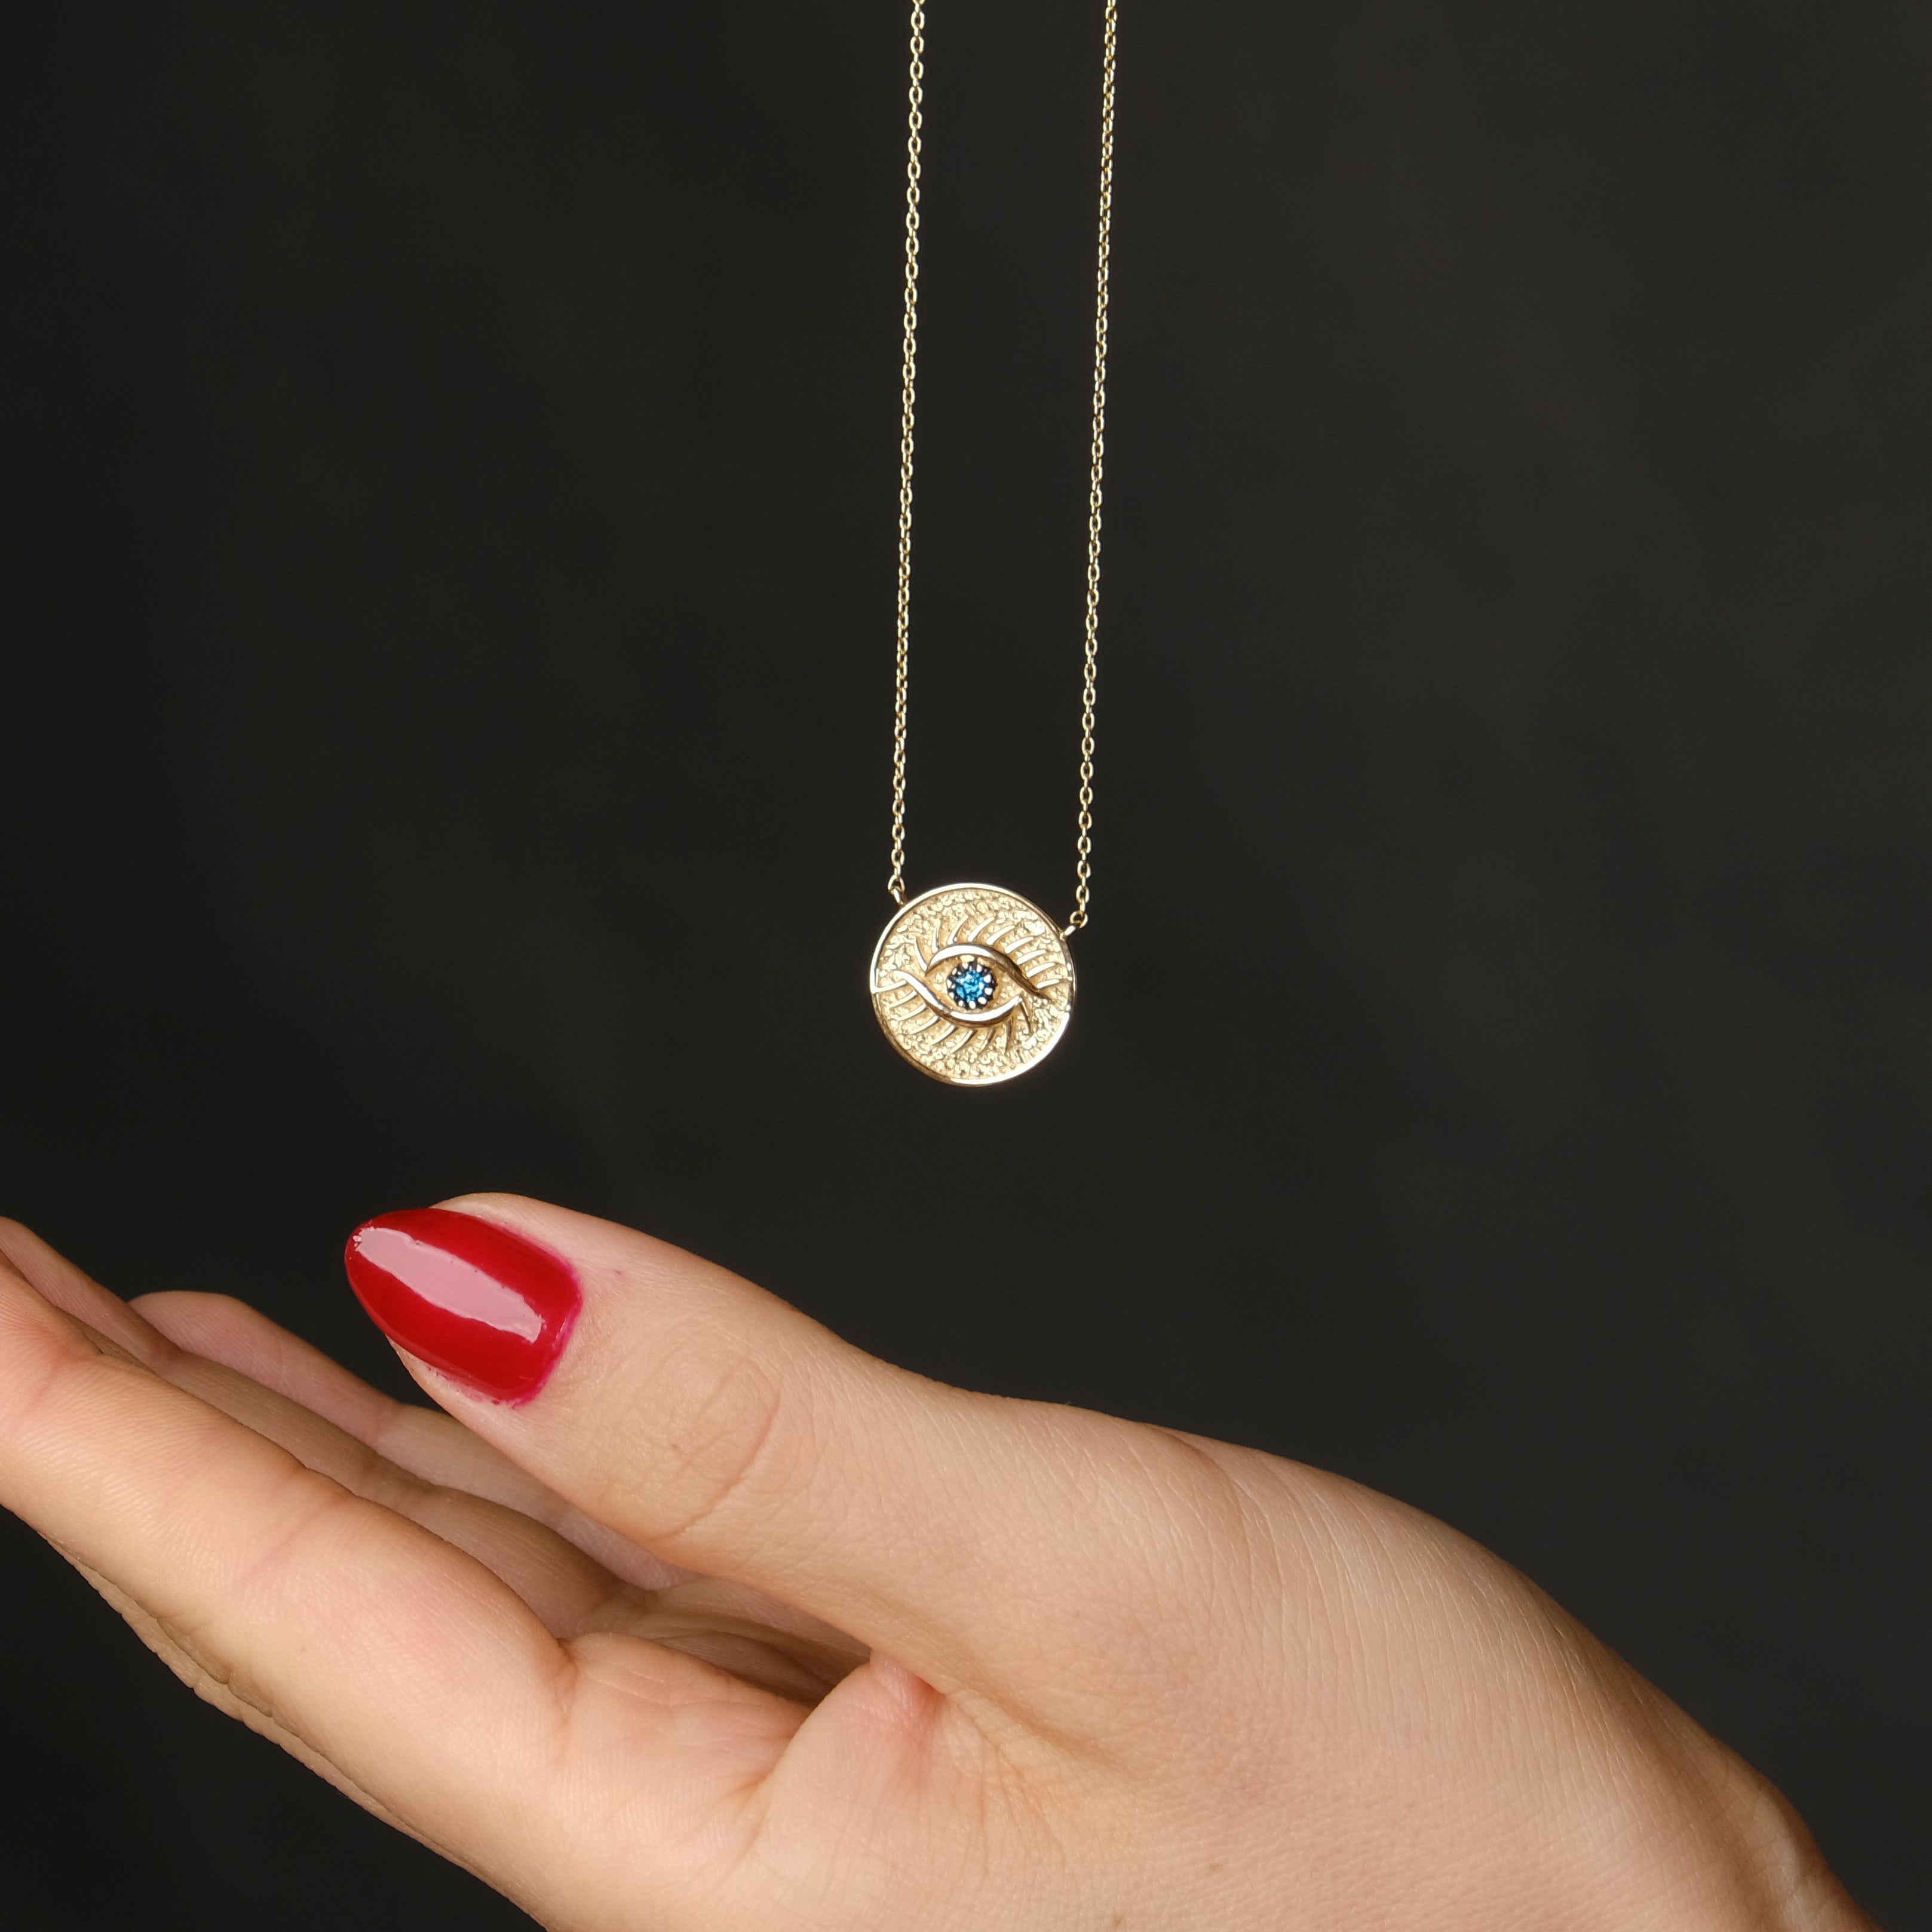 Vintage Blue Diamond Eye Medallion Necklace Available in 14K and 18K Gold